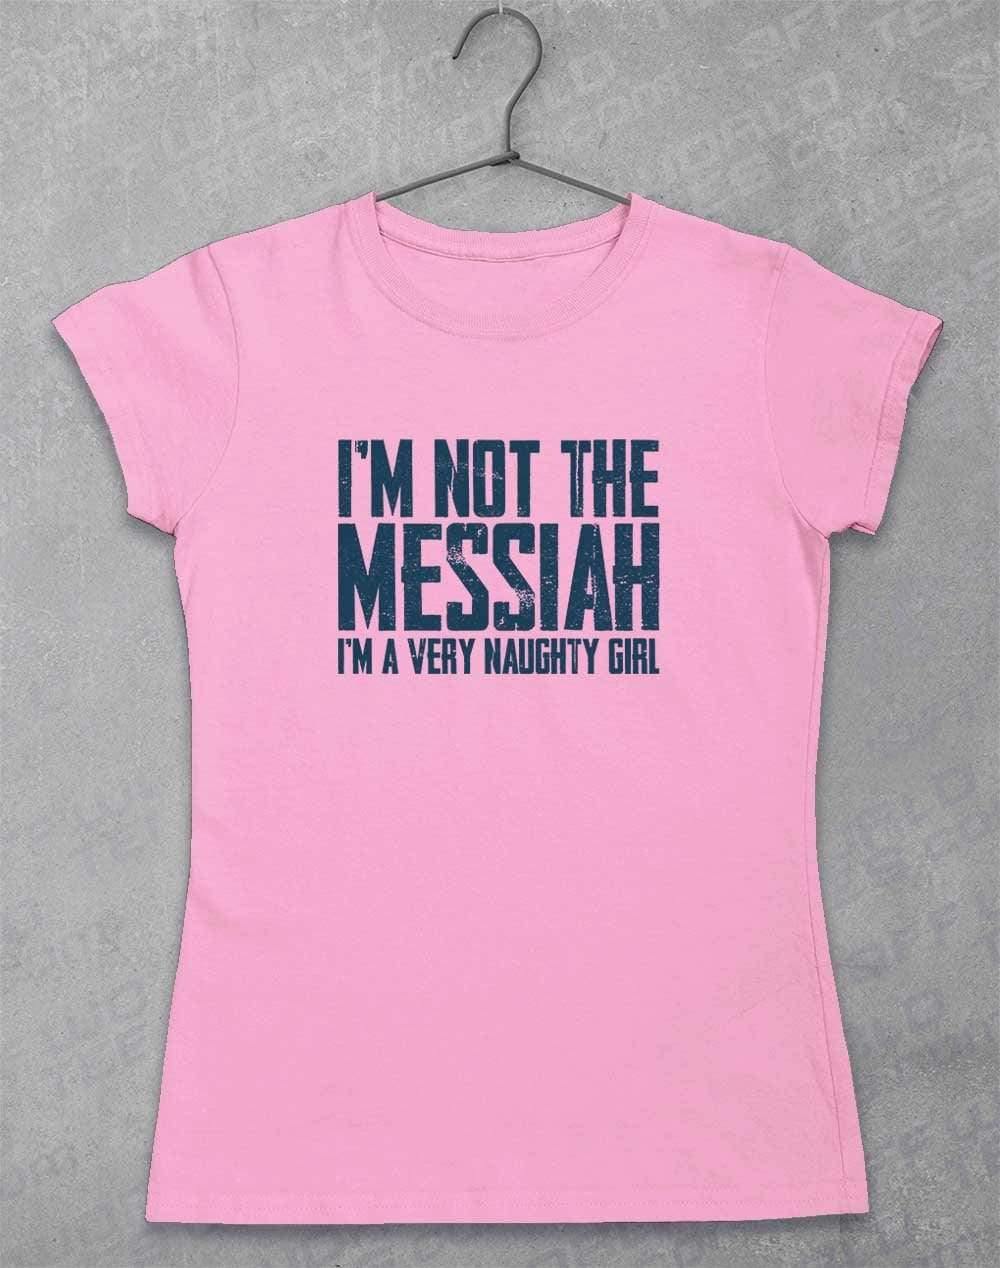 I'm Not the Messiah I'm a Very Naughty Girl Womens T-Shirt 8-10 / Light Pink  - Off World Tees